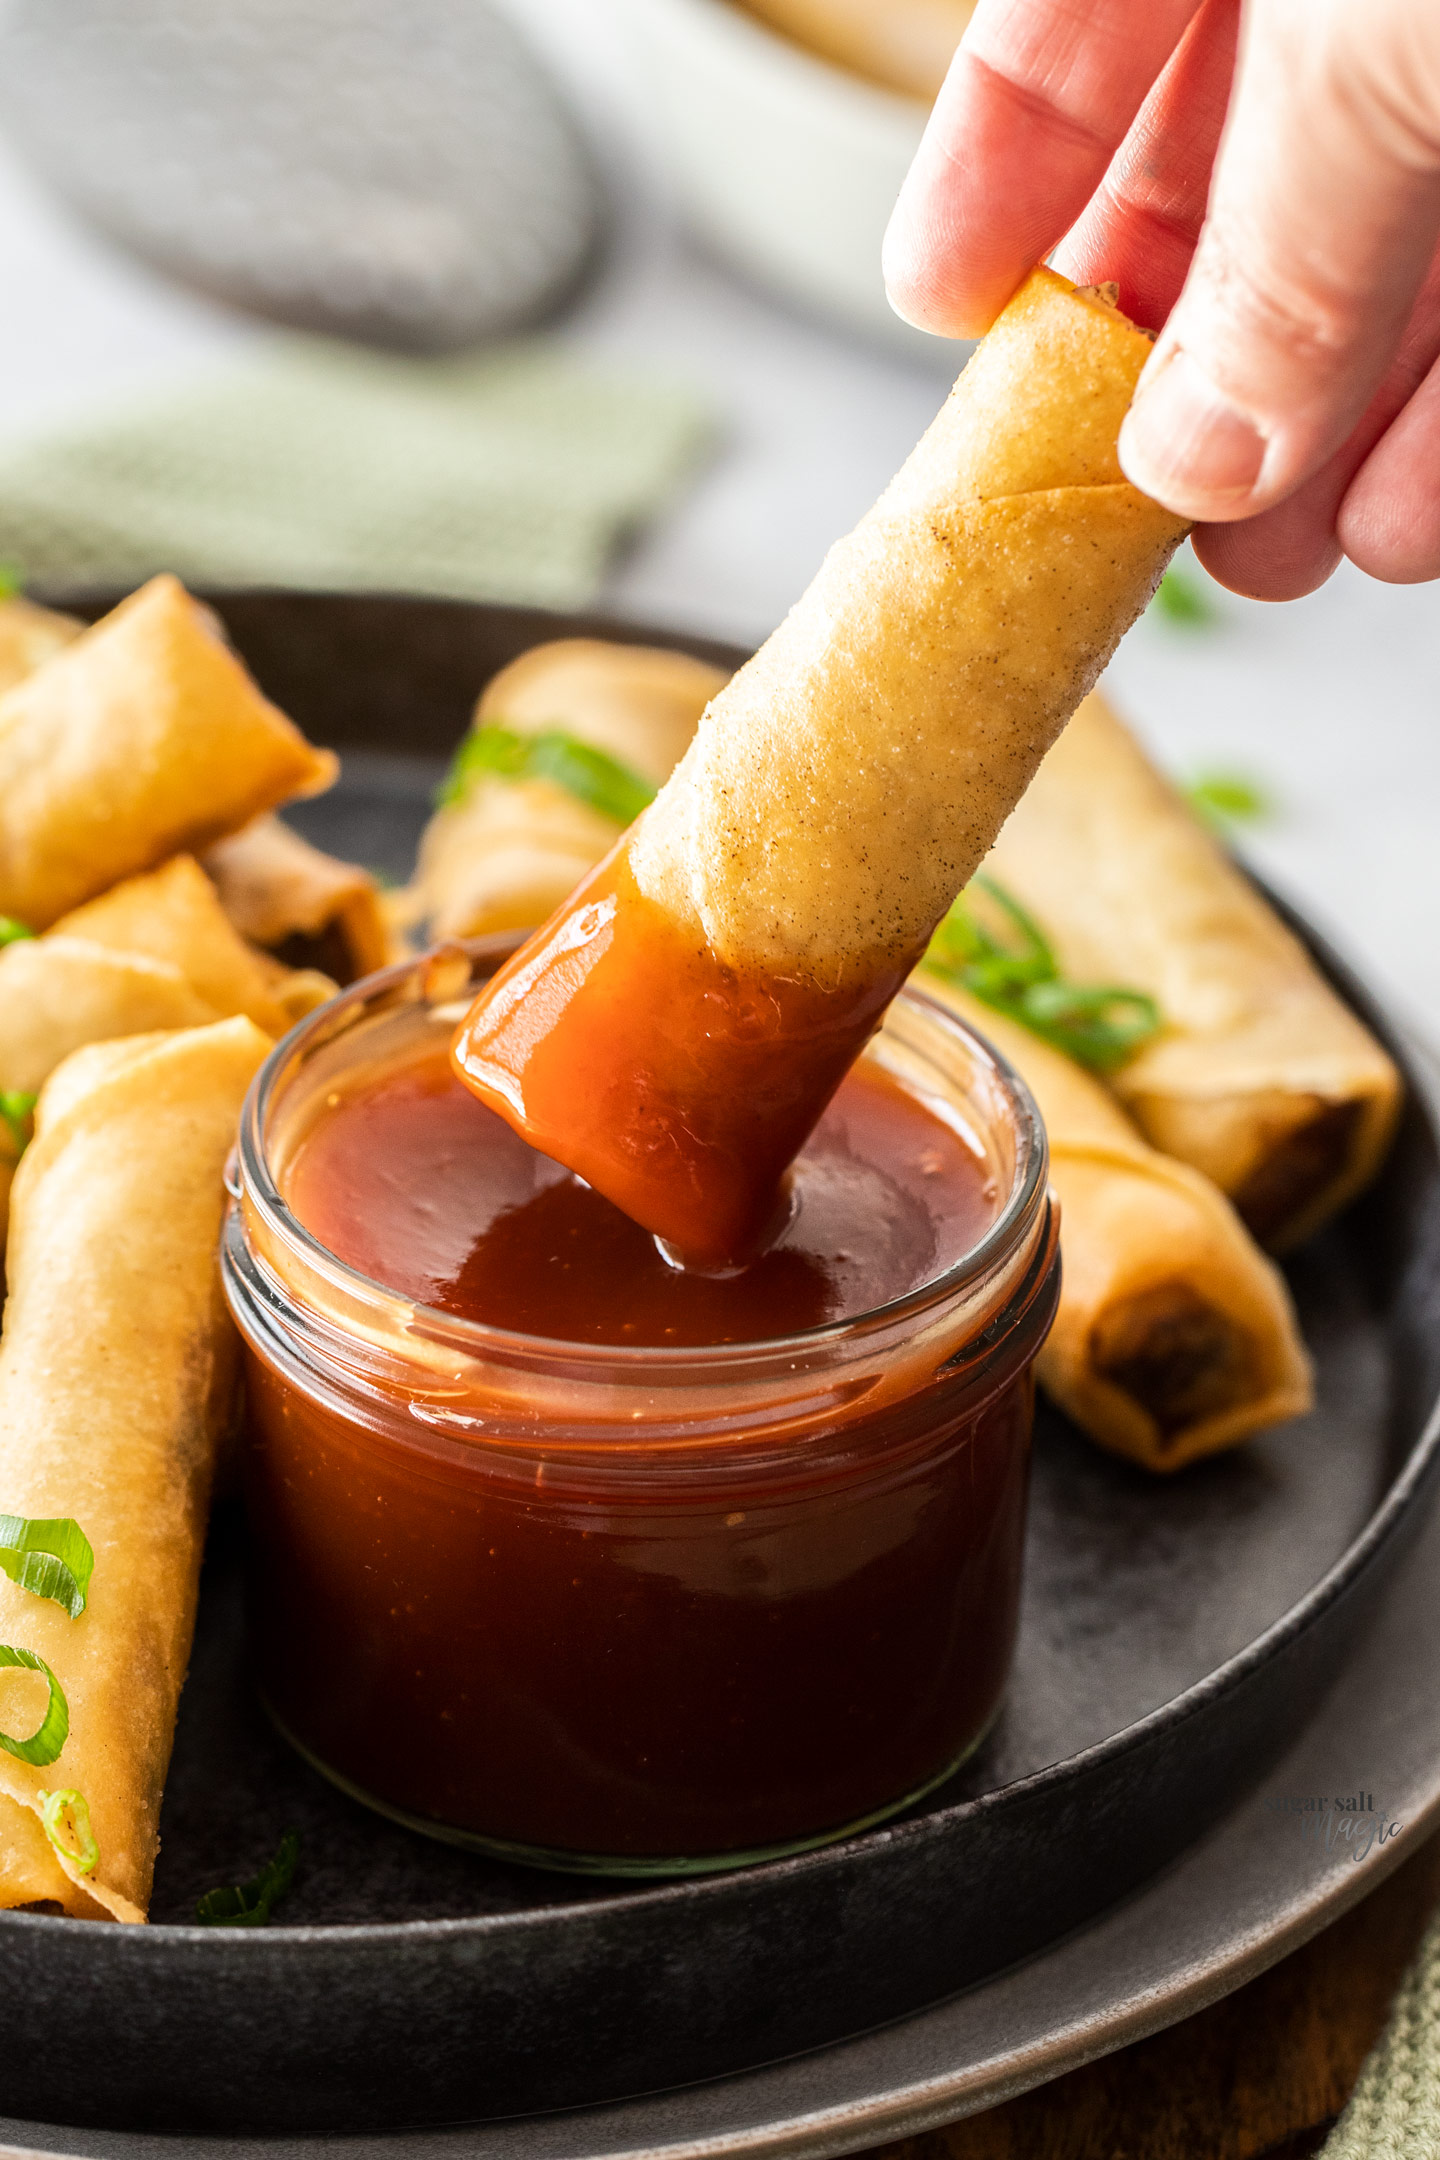 A spring roll being dipped into sweet and sour sauce.